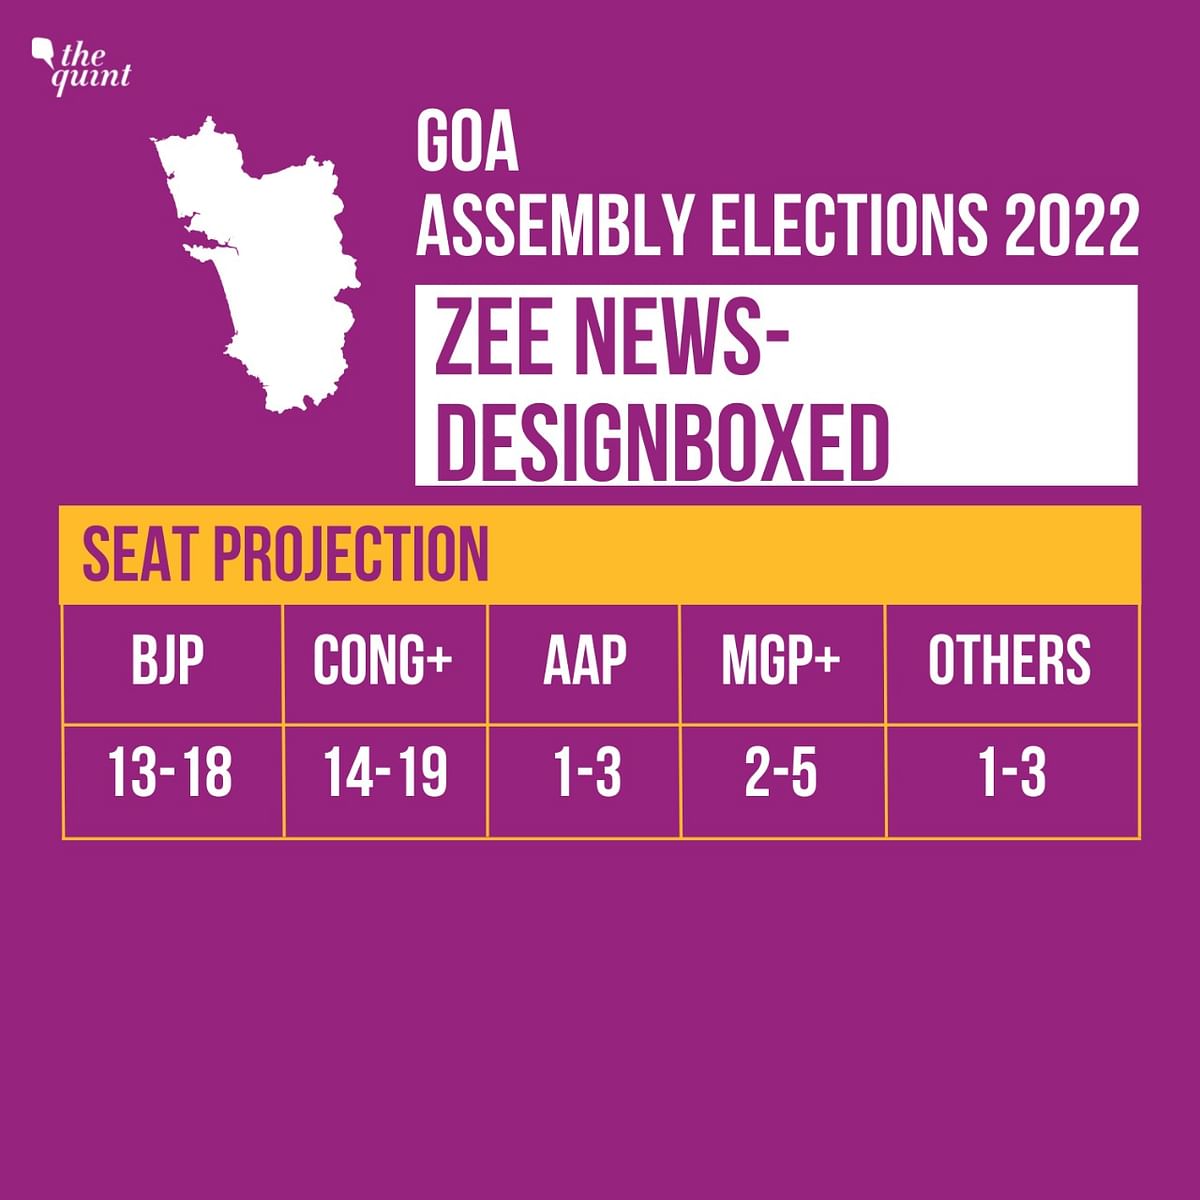 Catch the exit poll results for the Goa Assembly elections here.